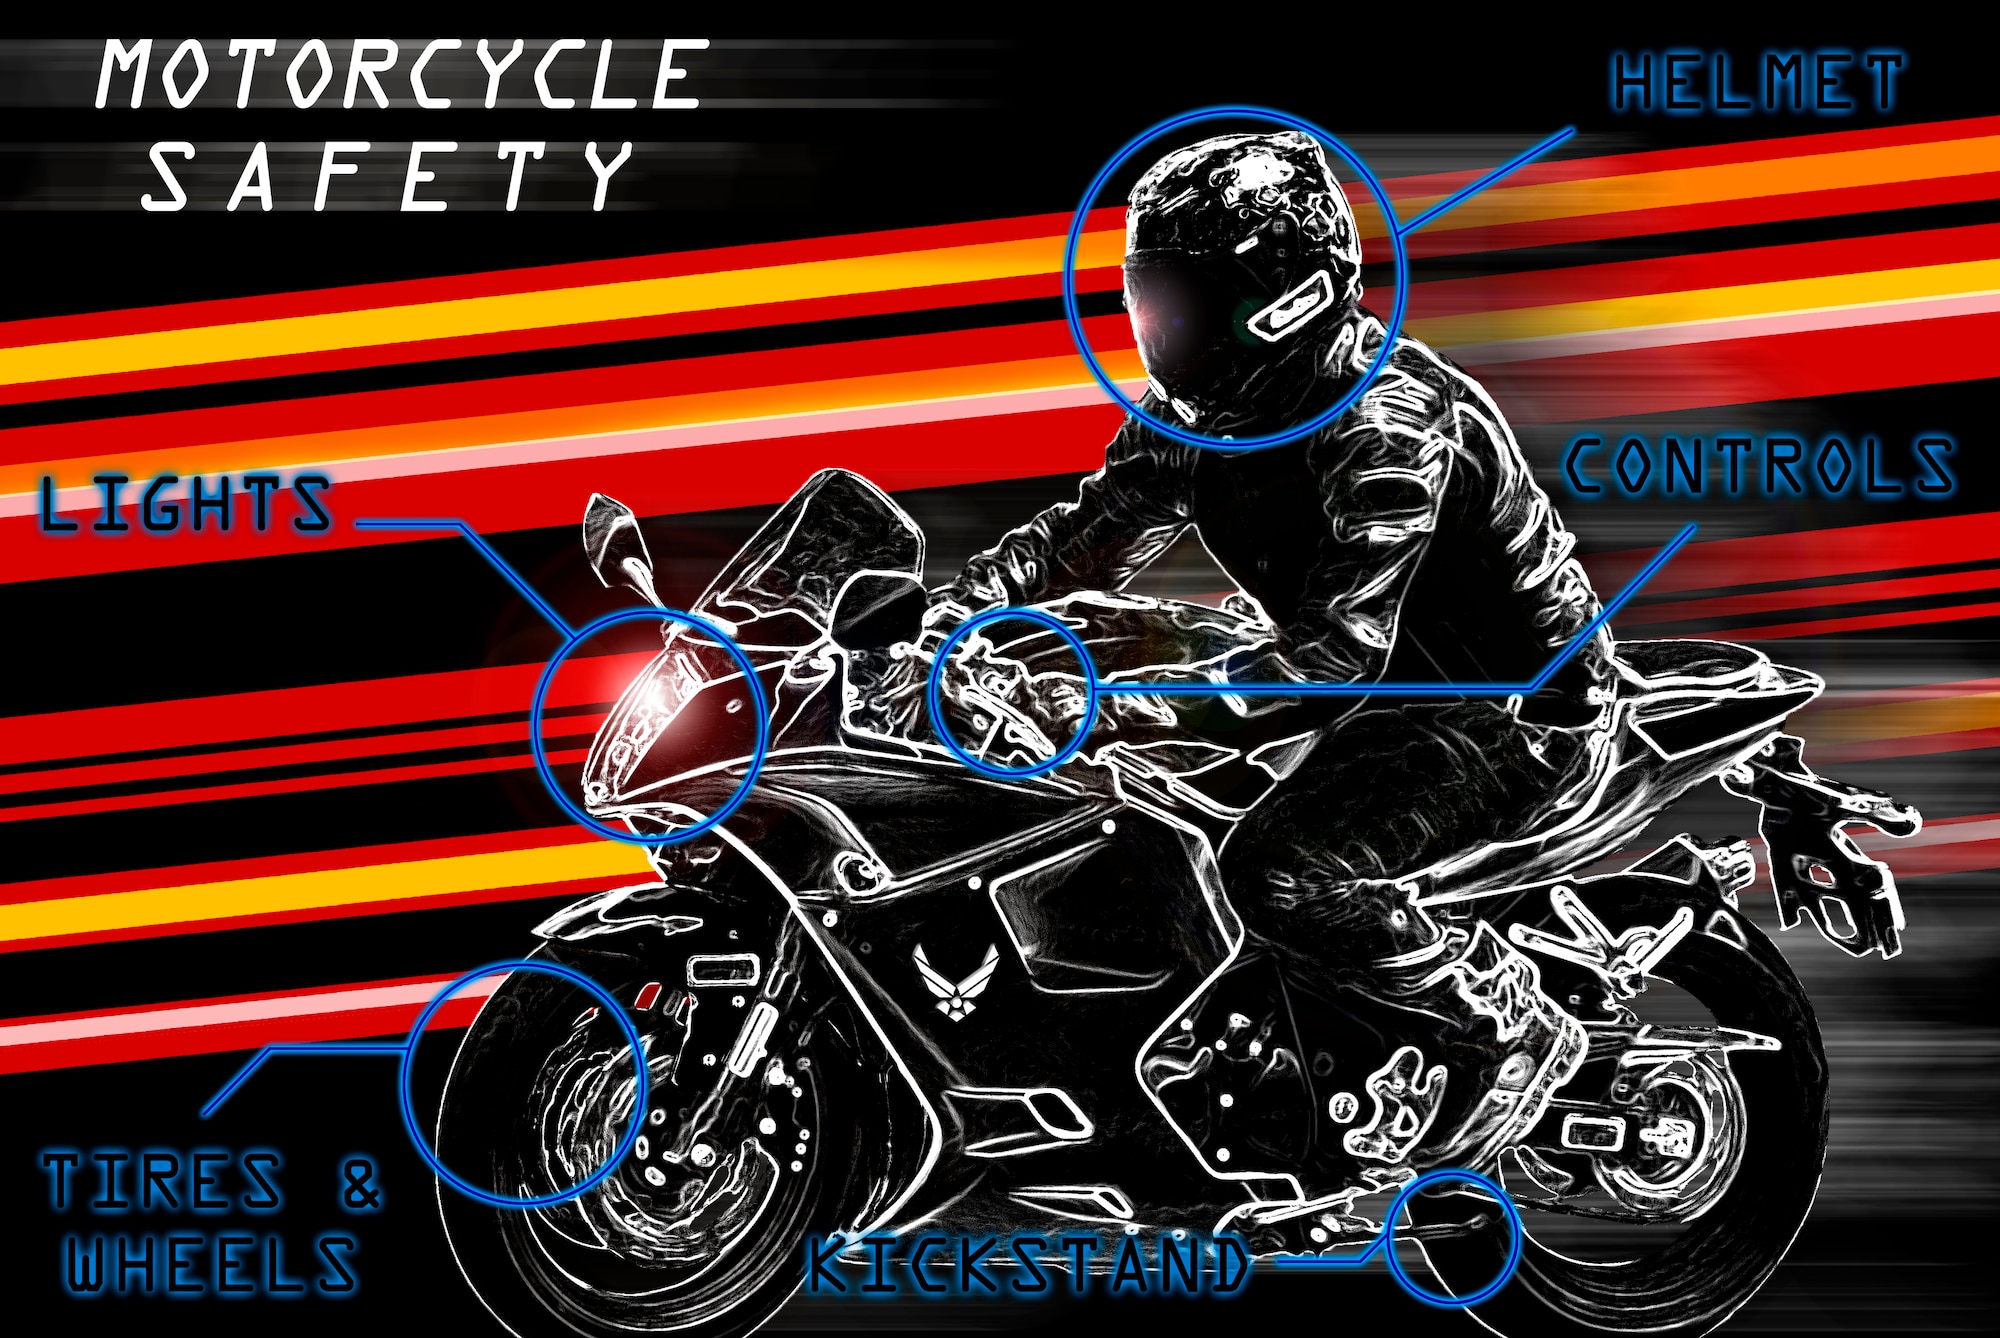 May is Motorcycle Safety Awareness Month. Before riding, be sure to check the T-CLOCK: tires and wheels, controls, lights, oil, chassis and kickstand. (U.S. Air Force graphic illustration by Airman 1st Class Devin Boyer/Released)